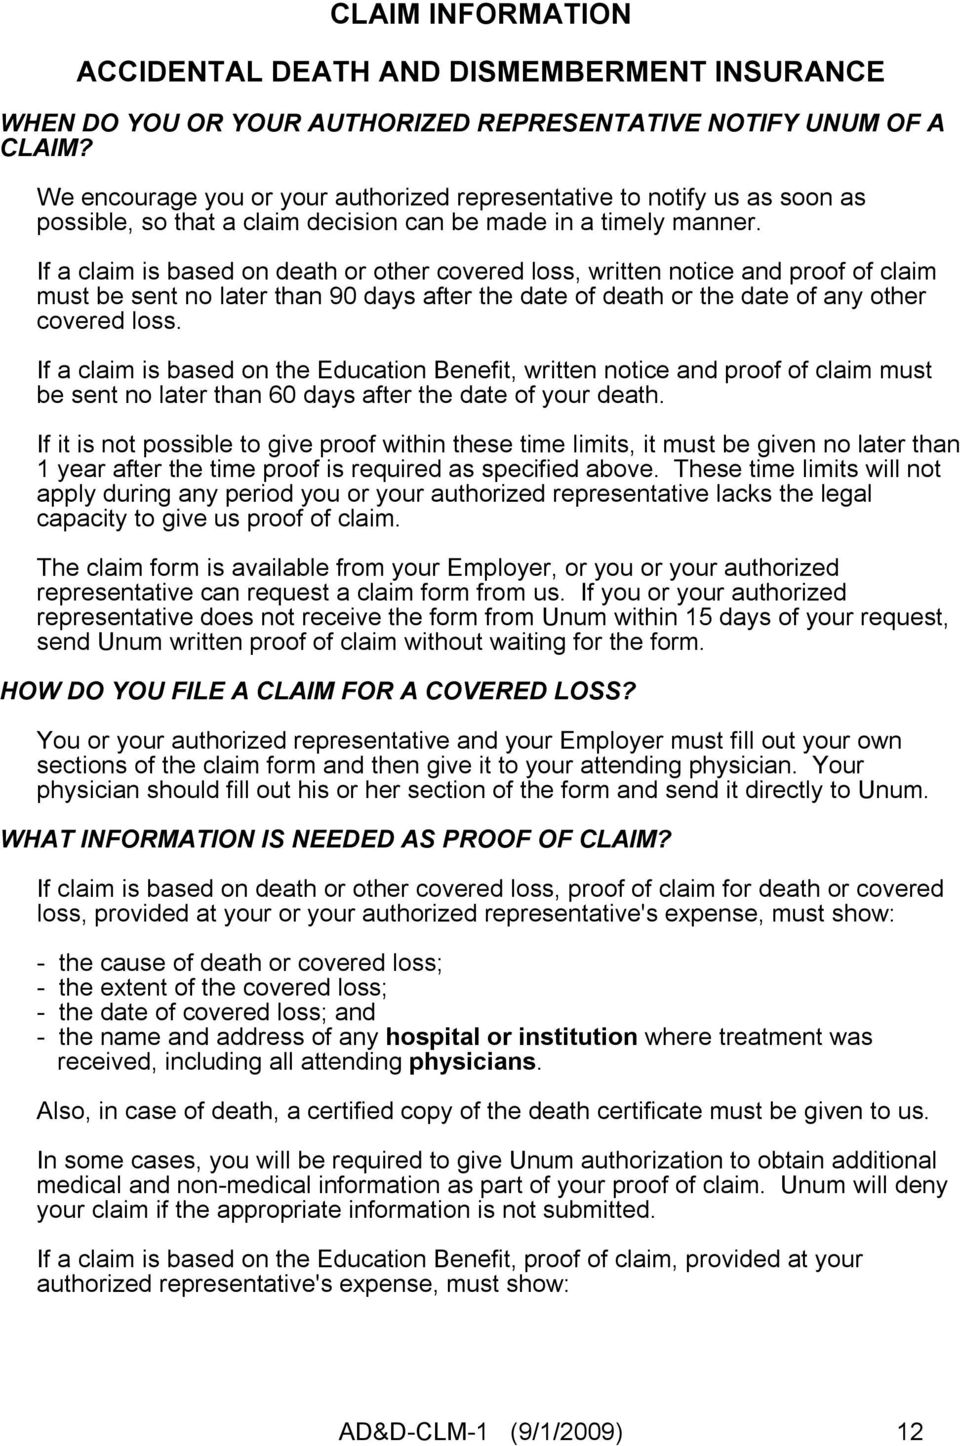 If a claim is based on death or other covered loss, written notice and proof of claim must be sent no later than 90 days after the date of death or the date of any other covered loss.